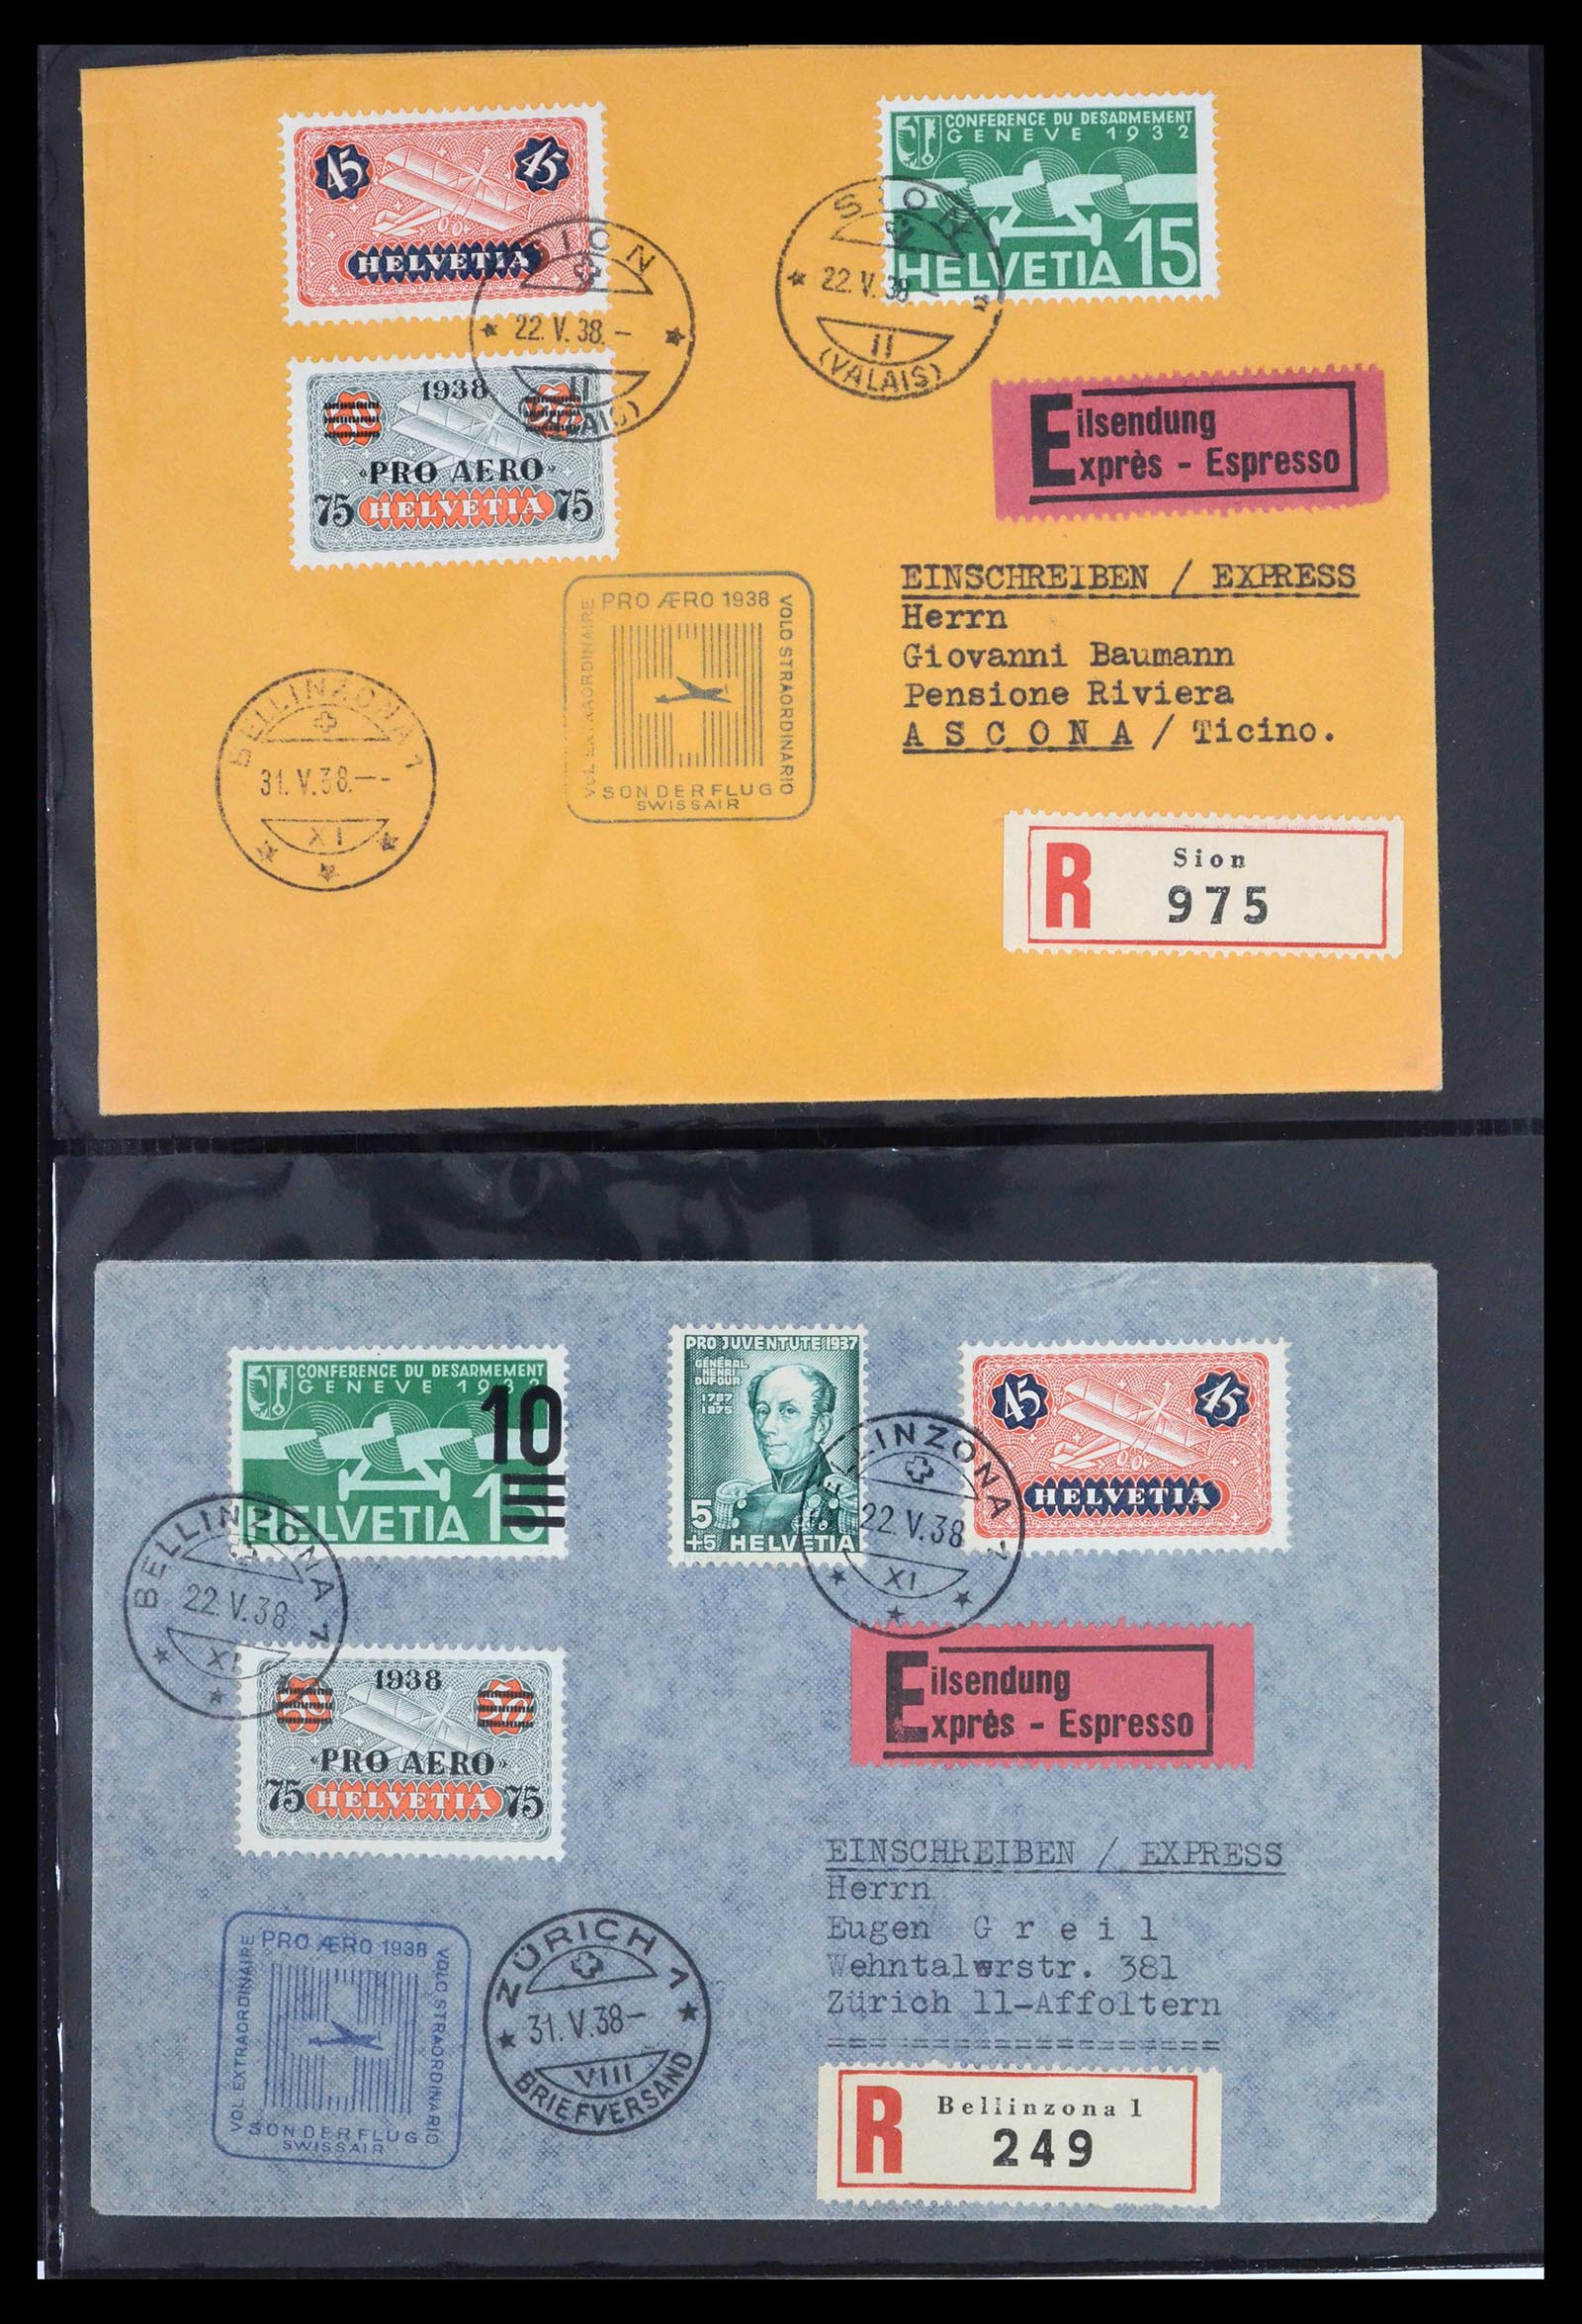 39533 0012 - Stamp collection 39533 Zwitserland airmail covers 1925-1960.